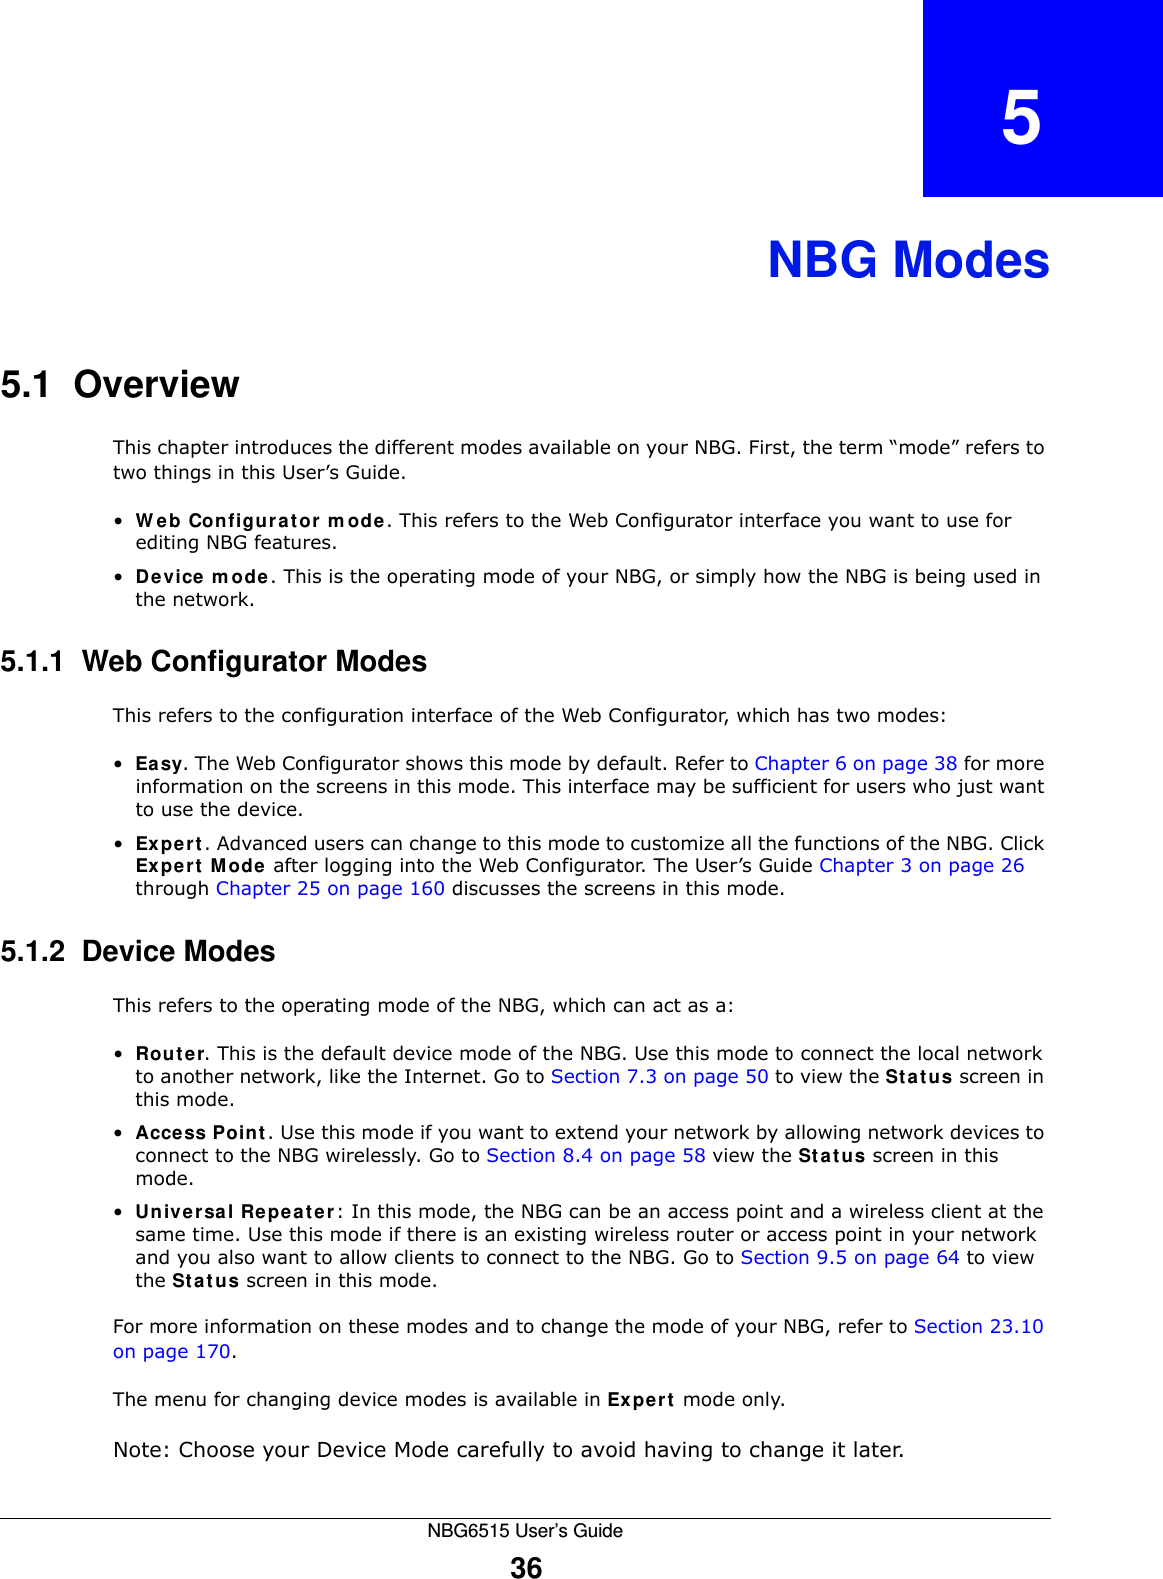 NBG6515 User’s Guide36CHAPTER   5NBG Modes5.1  OverviewThis chapter introduces the different modes available on your NBG. First, the term “mode” refers to two things in this User’s Guide.•Web Configurator mode. This refers to the Web Configurator interface you want to use for editing NBG features. •Device mode. This is the operating mode of your NBG, or simply how the NBG is being used in the network. 5.1.1  Web Configurator ModesThis refers to the configuration interface of the Web Configurator, which has two modes:•Easy. The Web Configurator shows this mode by default. Refer to Chapter 6 on page 38 for more information on the screens in this mode. This interface may be sufficient for users who just want to use the device.•Expert. Advanced users can change to this mode to customize all the functions of the NBG. Click Expert Mode after logging into the Web Configurator. The User’s Guide Chapter 3 on page 26 through Chapter 25 on page 160 discusses the screens in this mode.5.1.2  Device ModesThis refers to the operating mode of the NBG, which can act as a:•Router. This is the default device mode of the NBG. Use this mode to connect the local network to another network, like the Internet. Go to Section 7.3 on page 50 to view the Status screen in this mode.•Access Point. Use this mode if you want to extend your network by allowing network devices to connect to the NBG wirelessly. Go to Section 8.4 on page 58 view the Status screen in this mode.•Universal Repeater: In this mode, the NBG can be an access point and a wireless client at the same time. Use this mode if there is an existing wireless router or access point in your network and you also want to allow clients to connect to the NBG. Go to Section 9.5 on page 64 to view the Status screen in this mode.For more information on these modes and to change the mode of your NBG, refer to Section 23.10 on page 170.The menu for changing device modes is available in Expert mode only. Note: Choose your Device Mode carefully to avoid having to change it later.